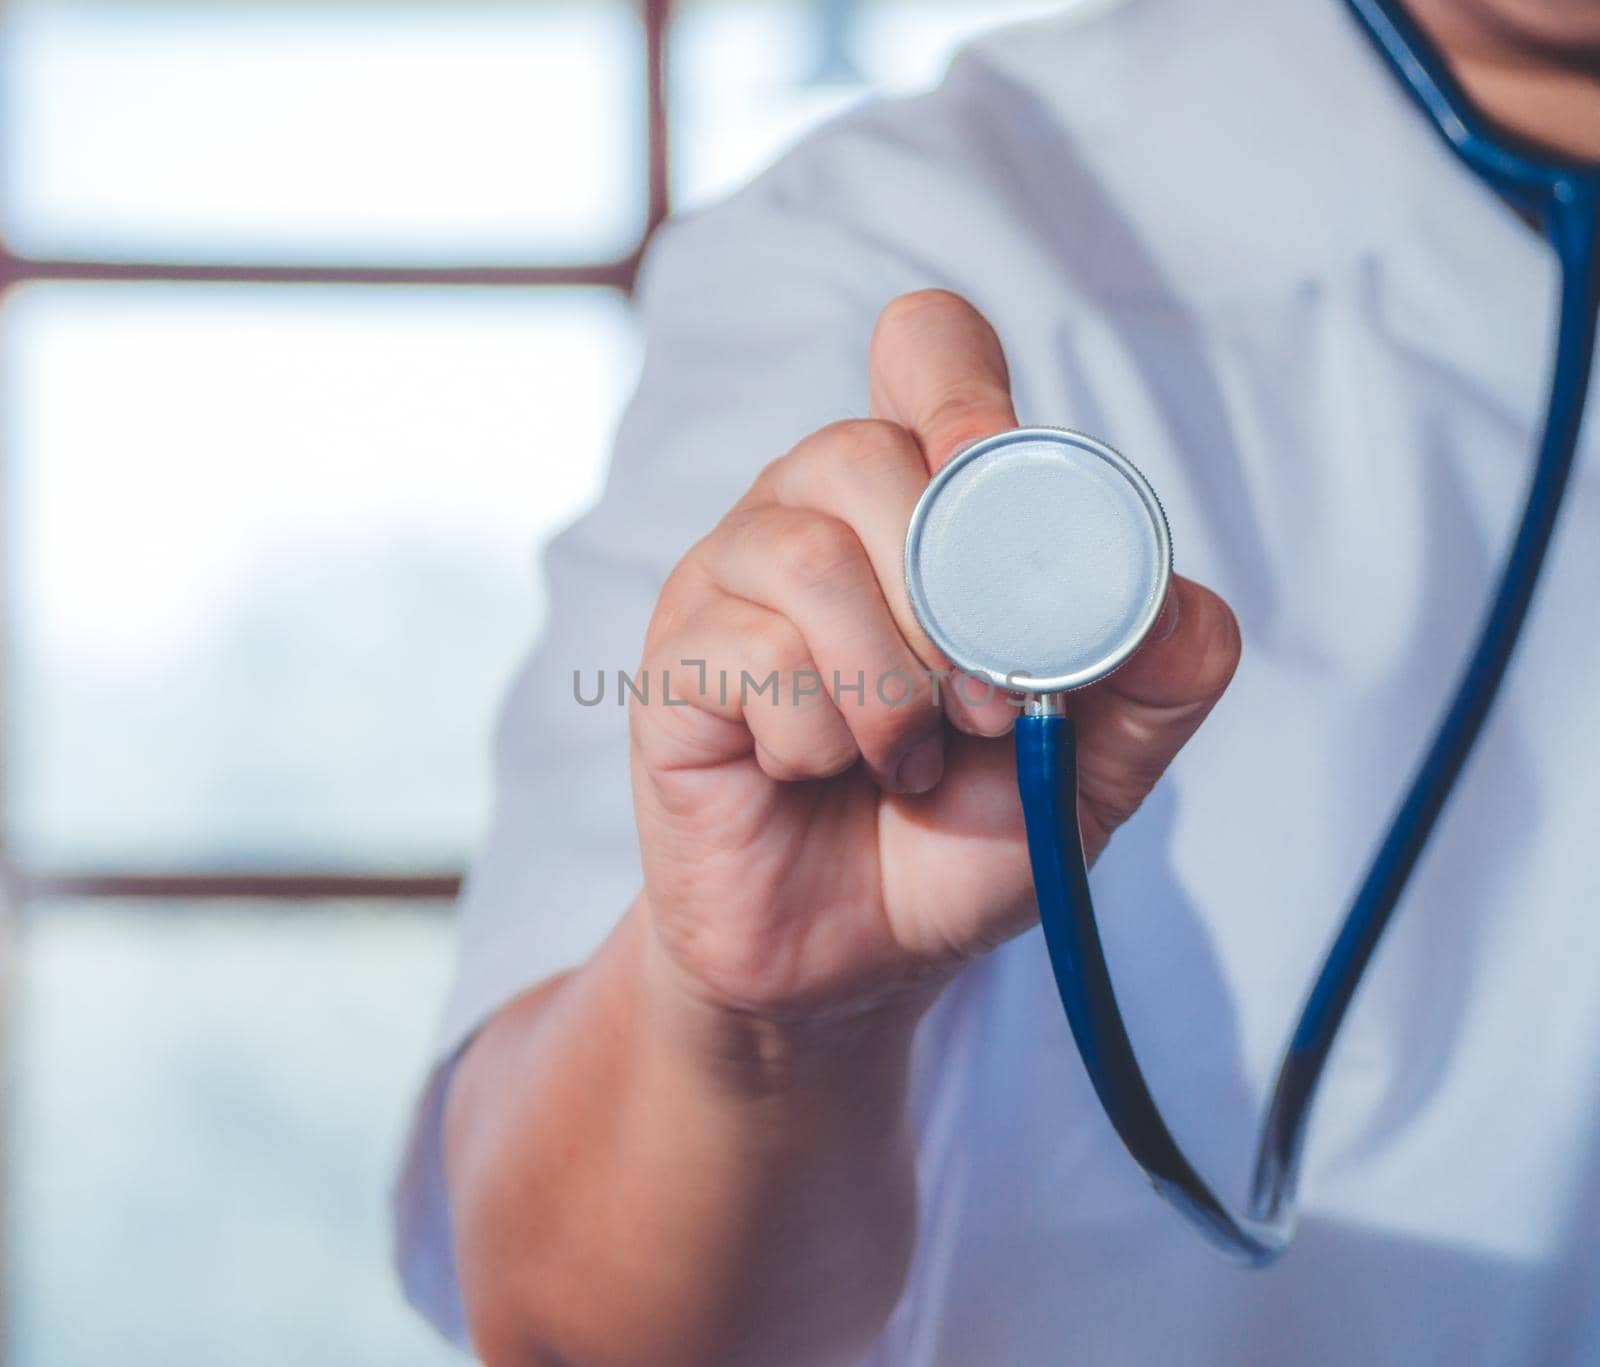 Male medicine doctor hand holding stethoscope against of chest on hospital background. Physician ready to examine patient. Medical and patient care concept.